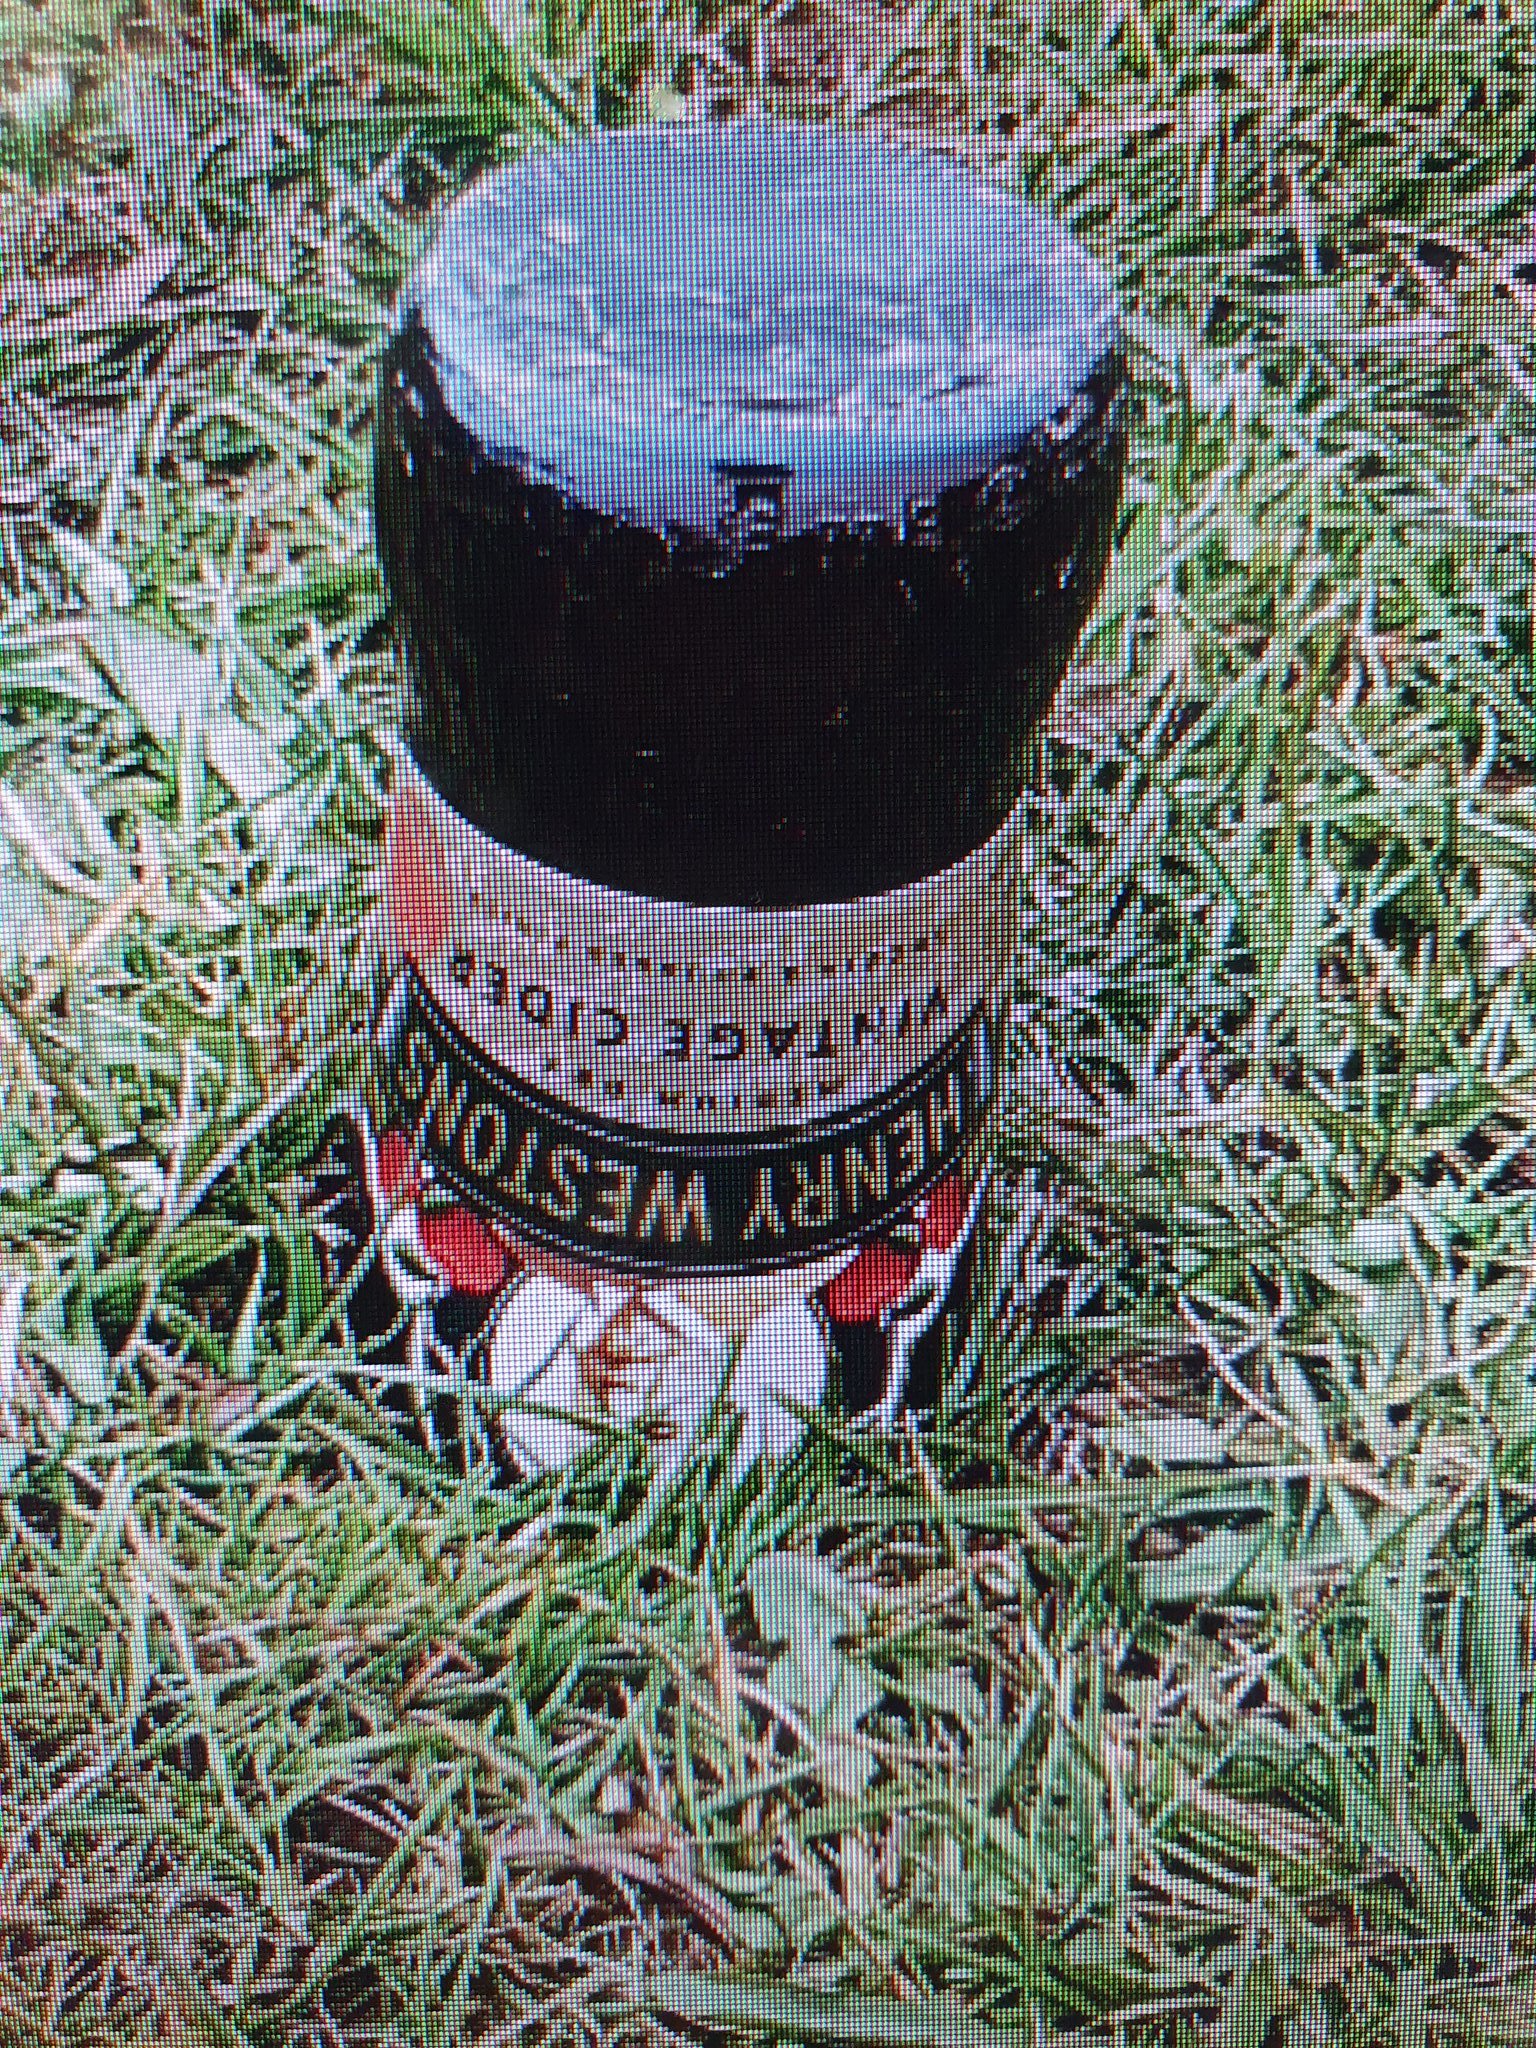 One of the glass bottles.